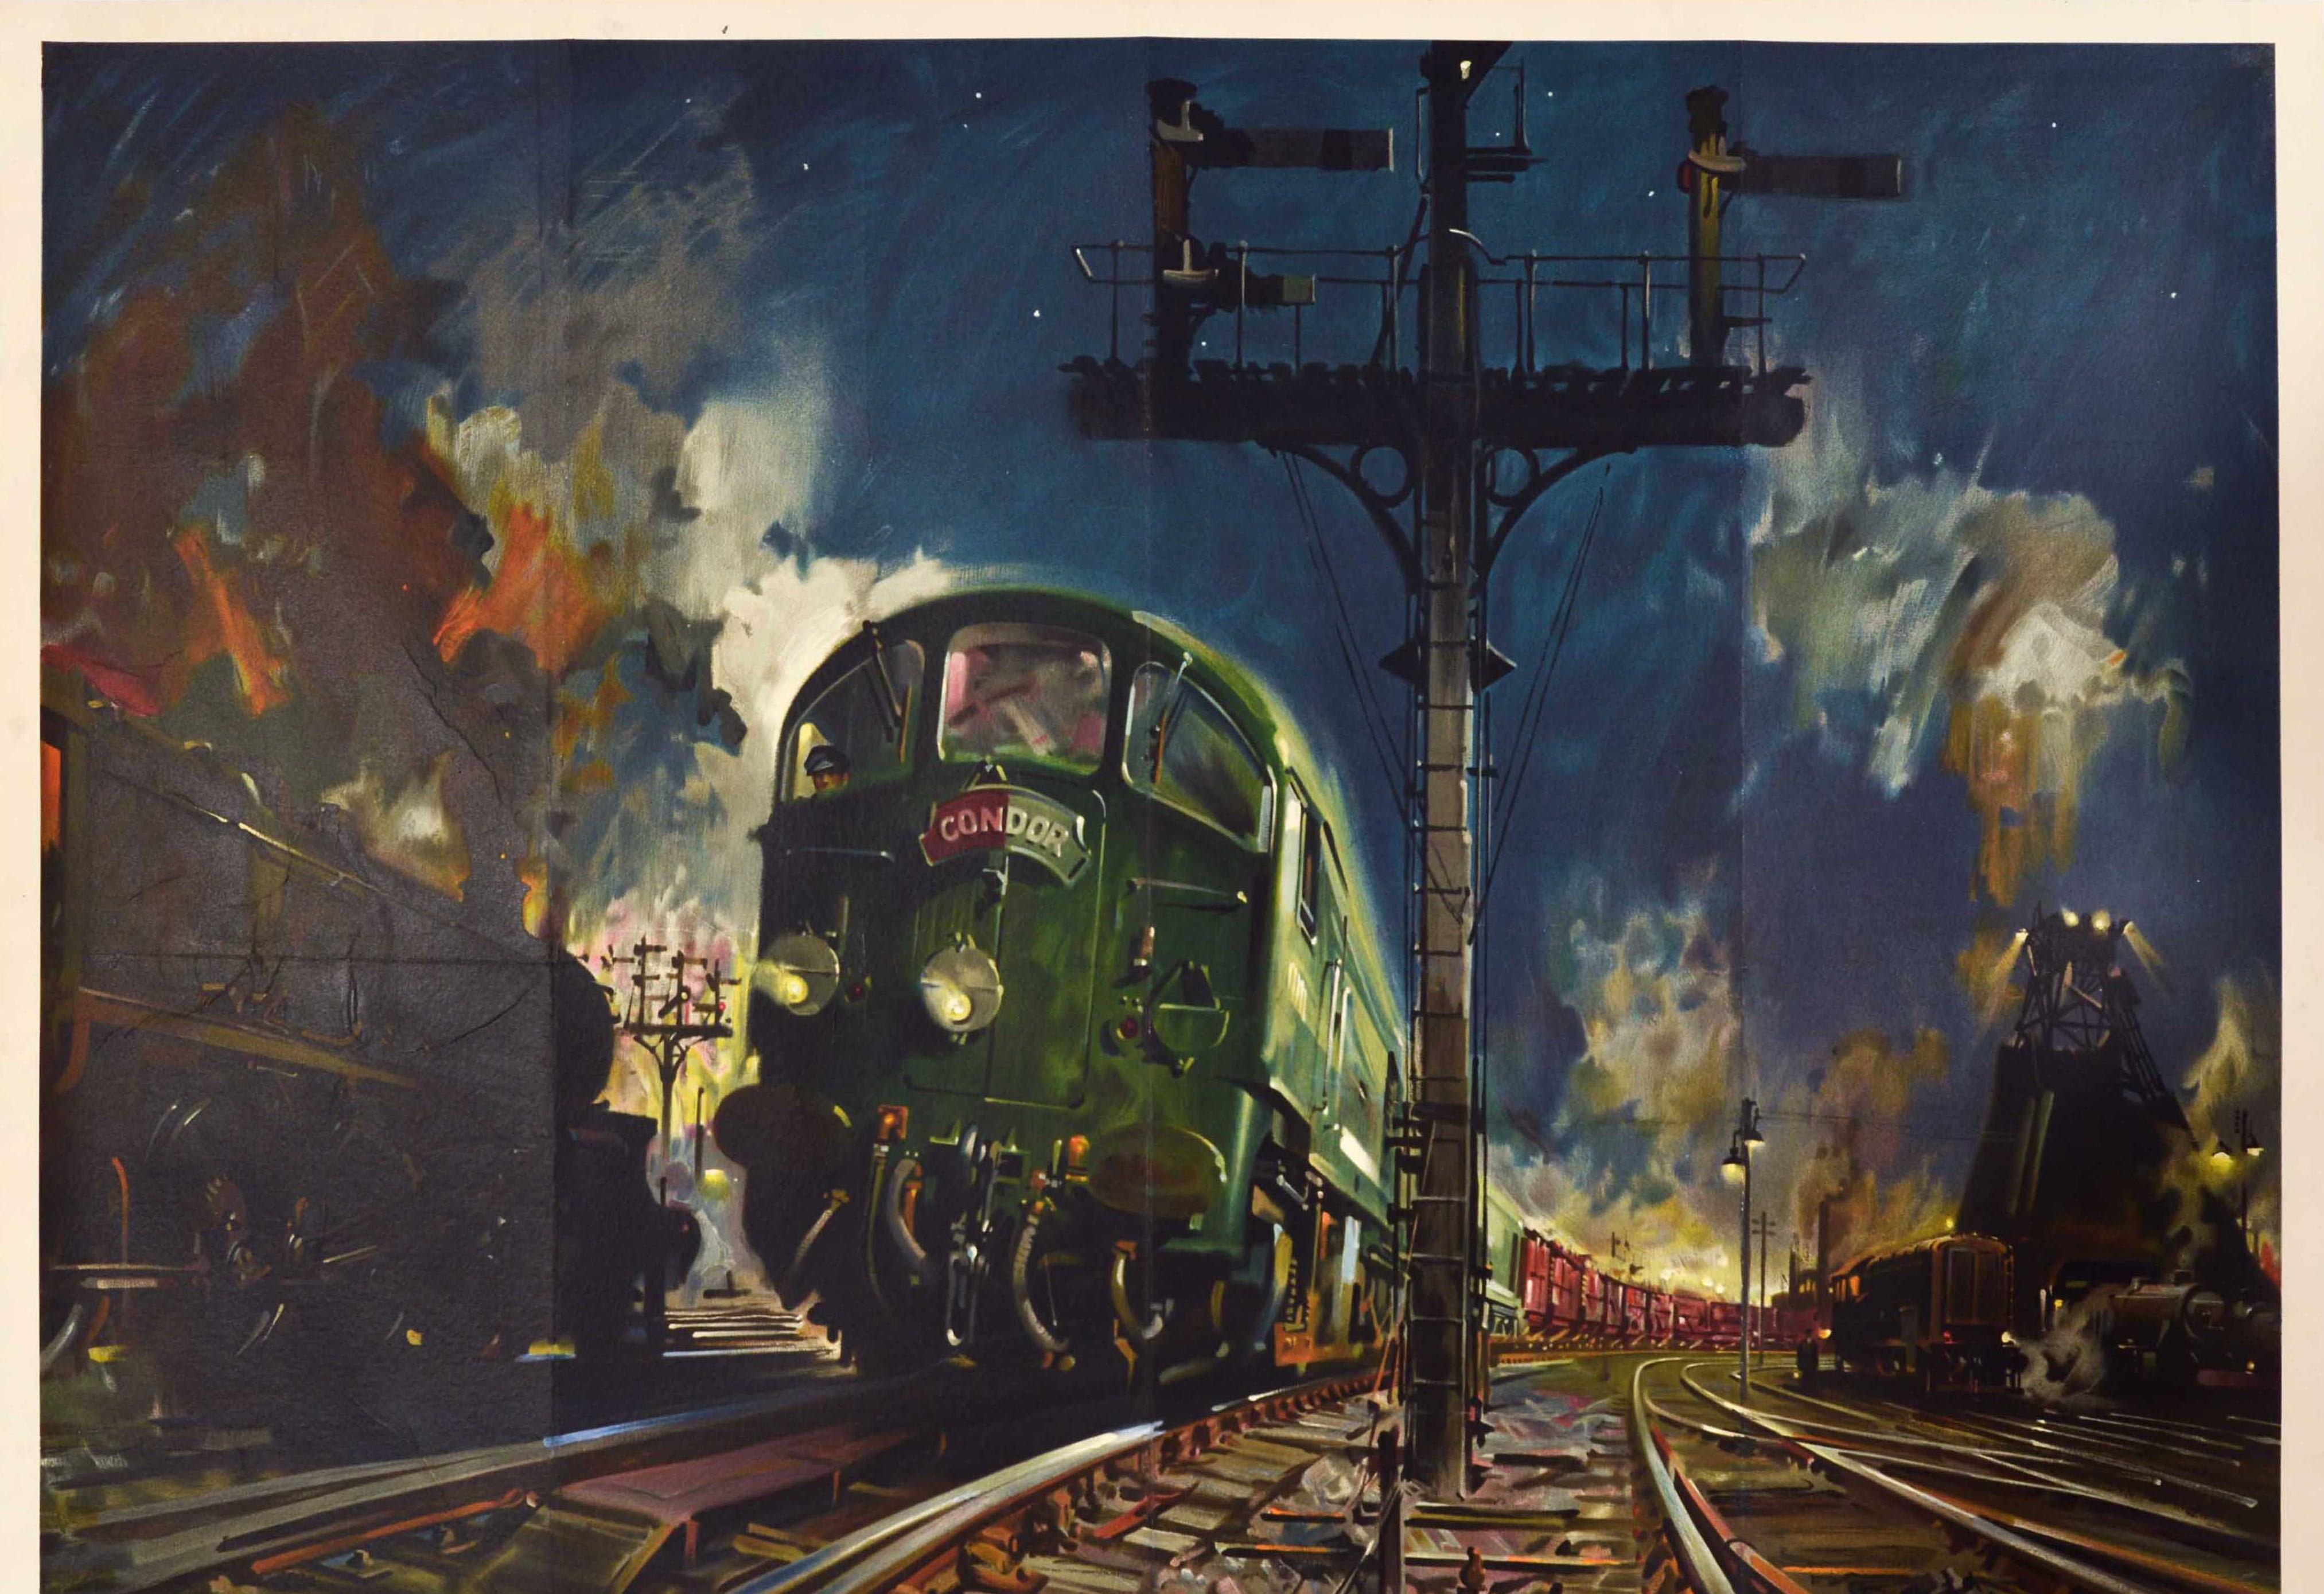 Original vintage British Railways poster - Night Freight - featuring artwork by the notable British artist Terence Tenison Cuneo (1907-1996) depicting the Condor on railway tracks next to a signal post in front of a dramatic night sky background,